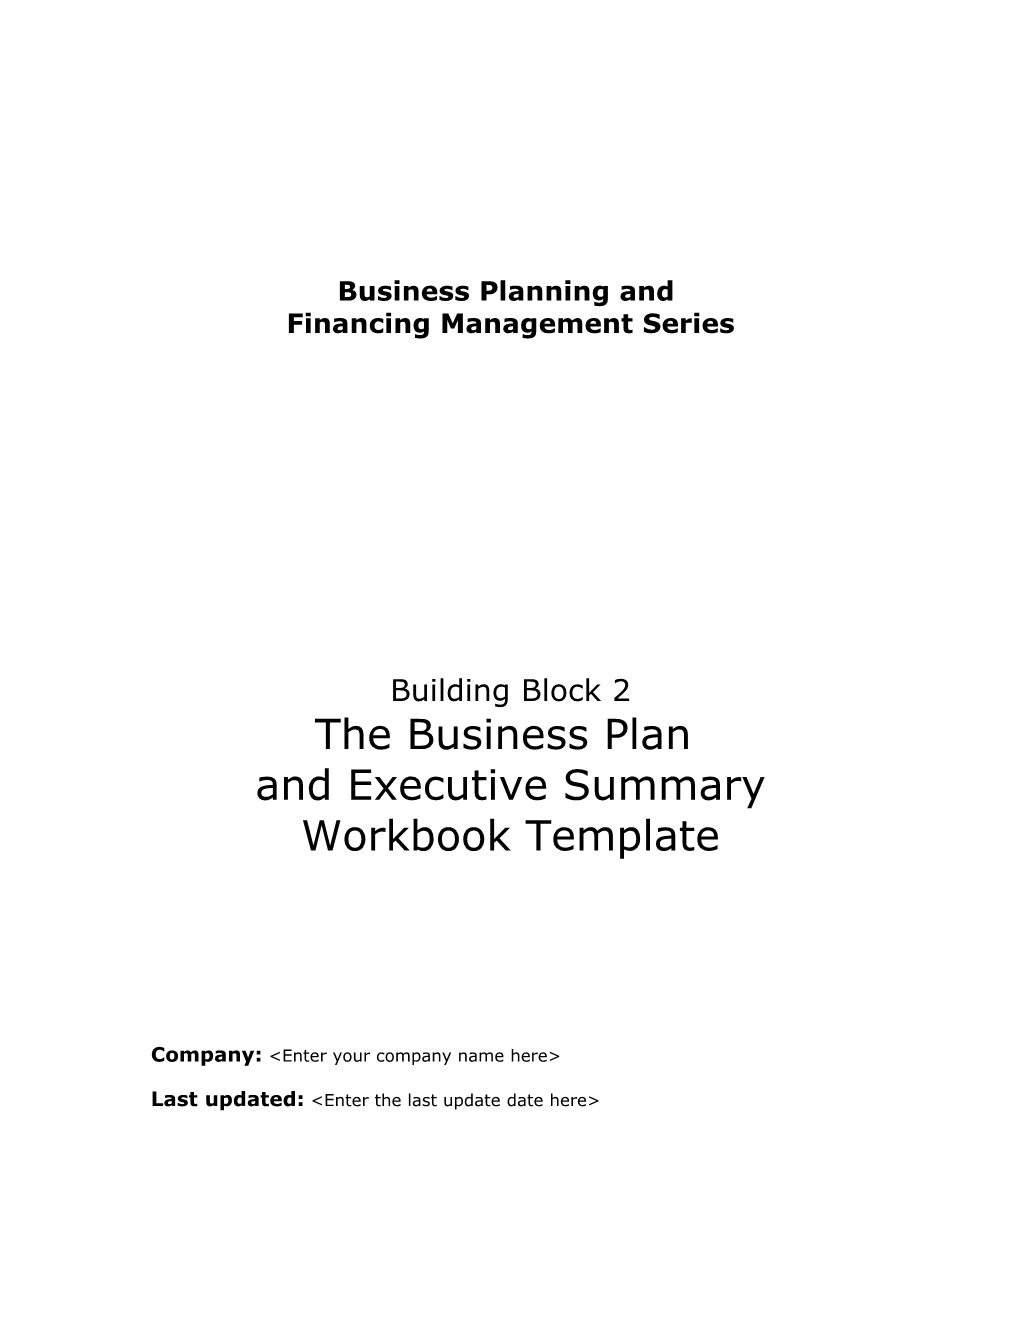 Business Planning and Financing Series